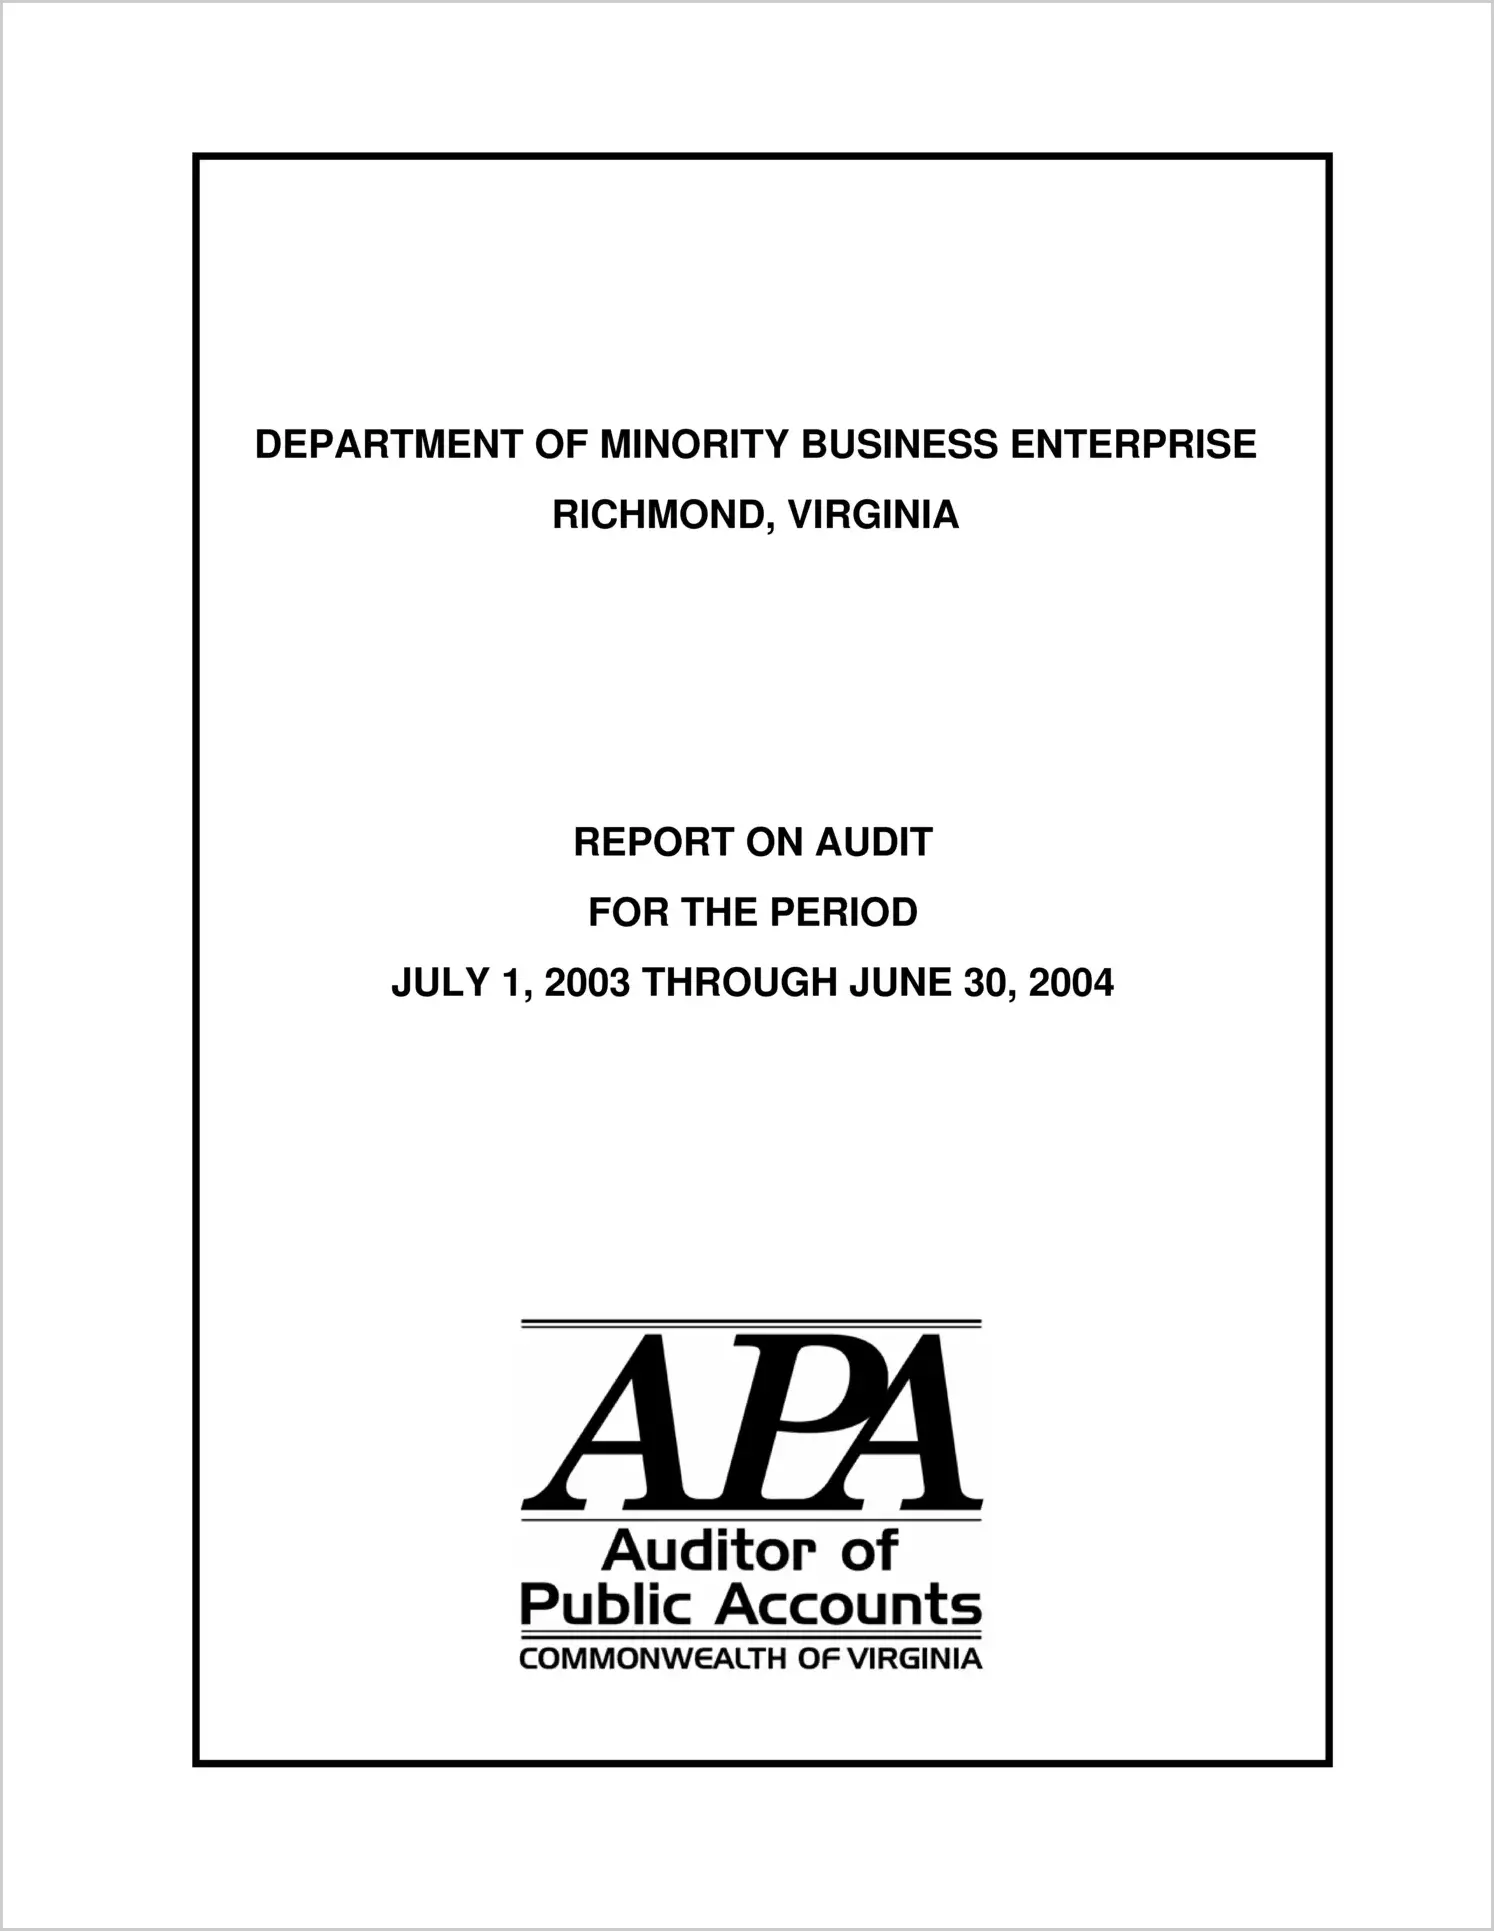 Department of Minority Business Enterprise for the period July 1, 2003 through June 30, 2004